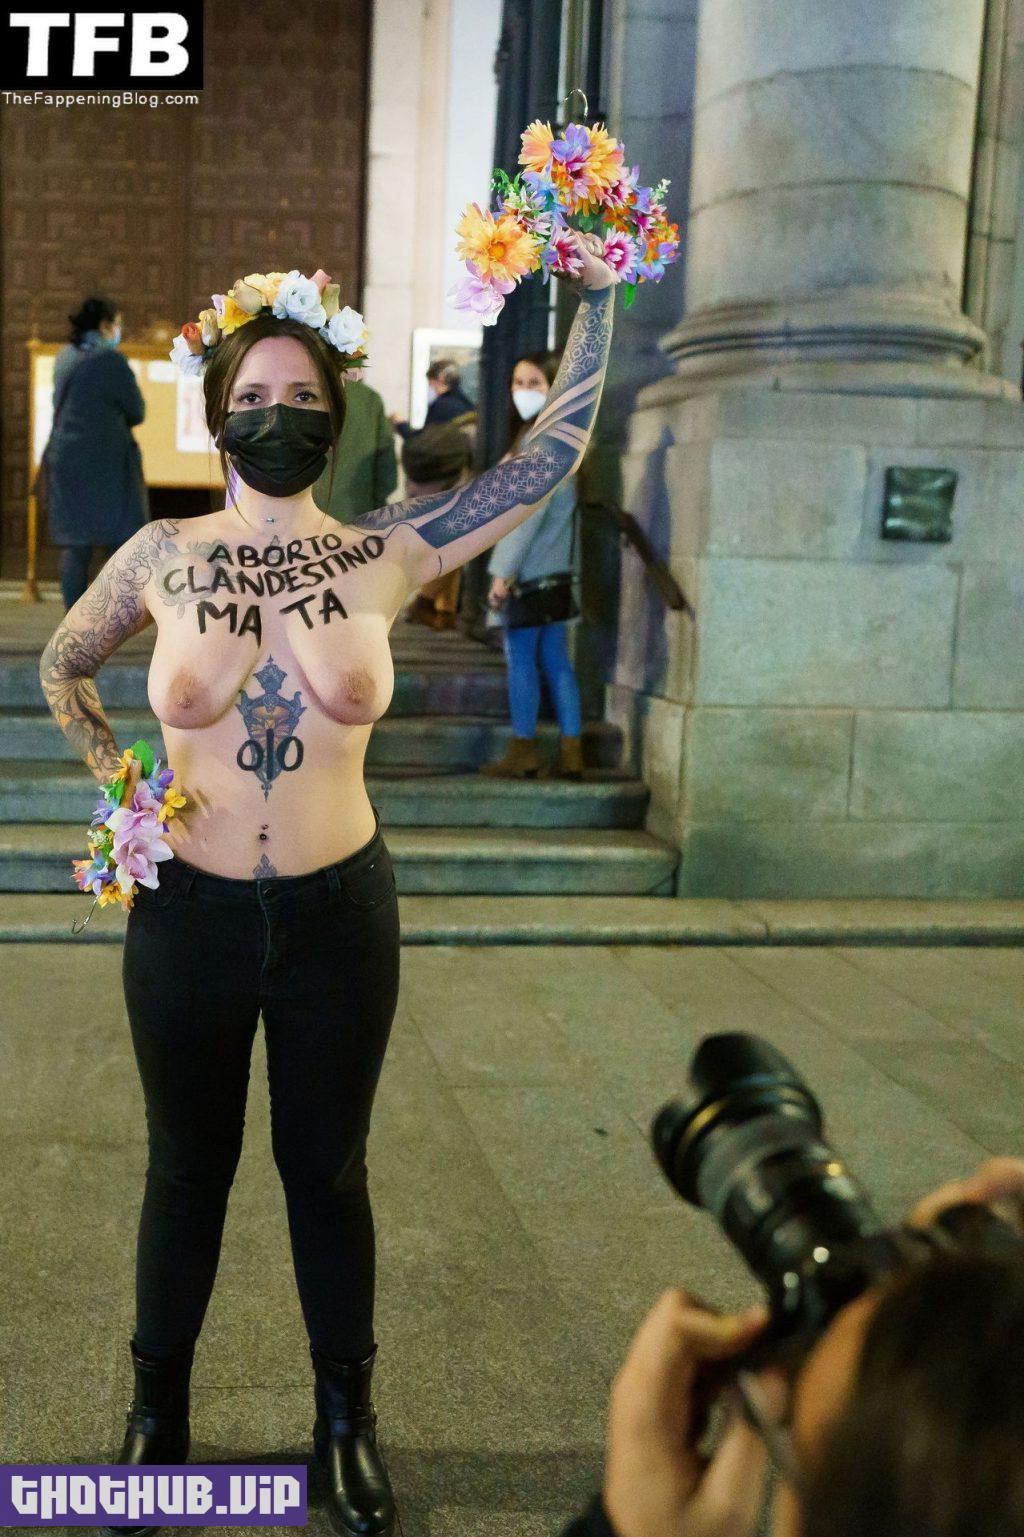 Femen Nude Protest The Fappening Blog 6